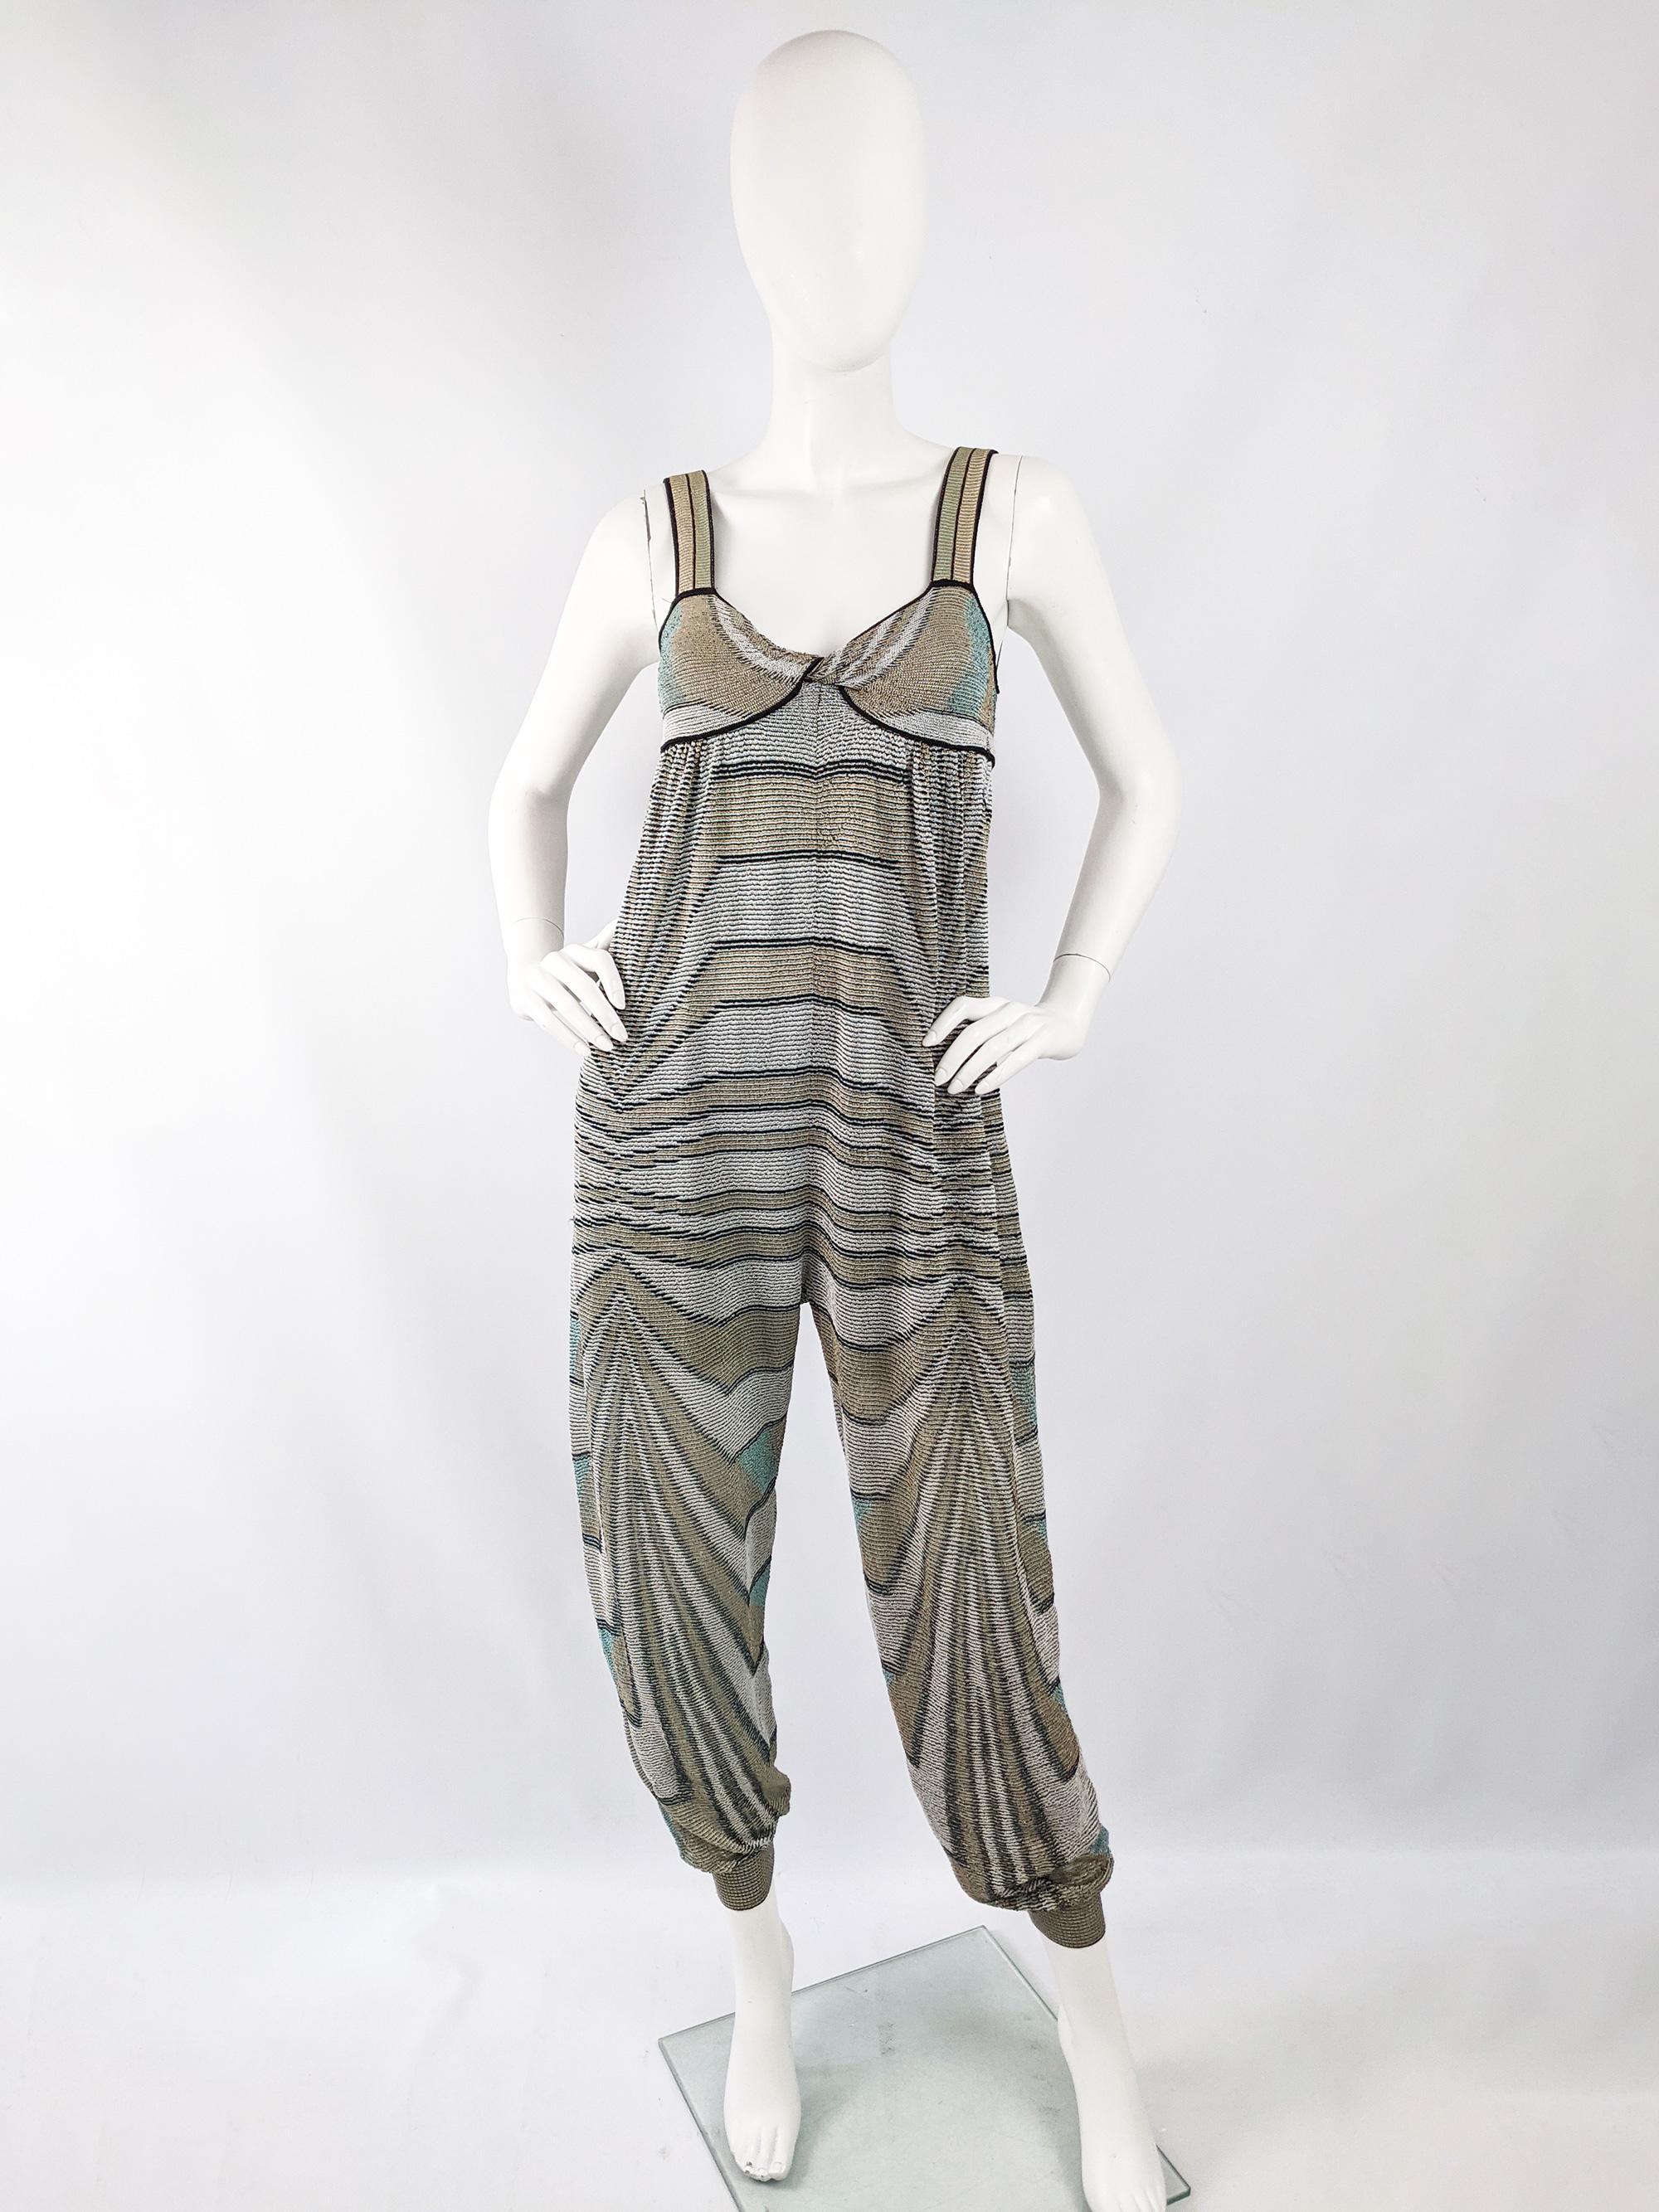 A fabulous M Missoni womens jumpsuit in a cotton and viscose mix lurex knit fabric with a sleeveless design and a loose, harem style fit which would look great worn with a belt at a party or kept unbelted for a more casual, relaxed look by the